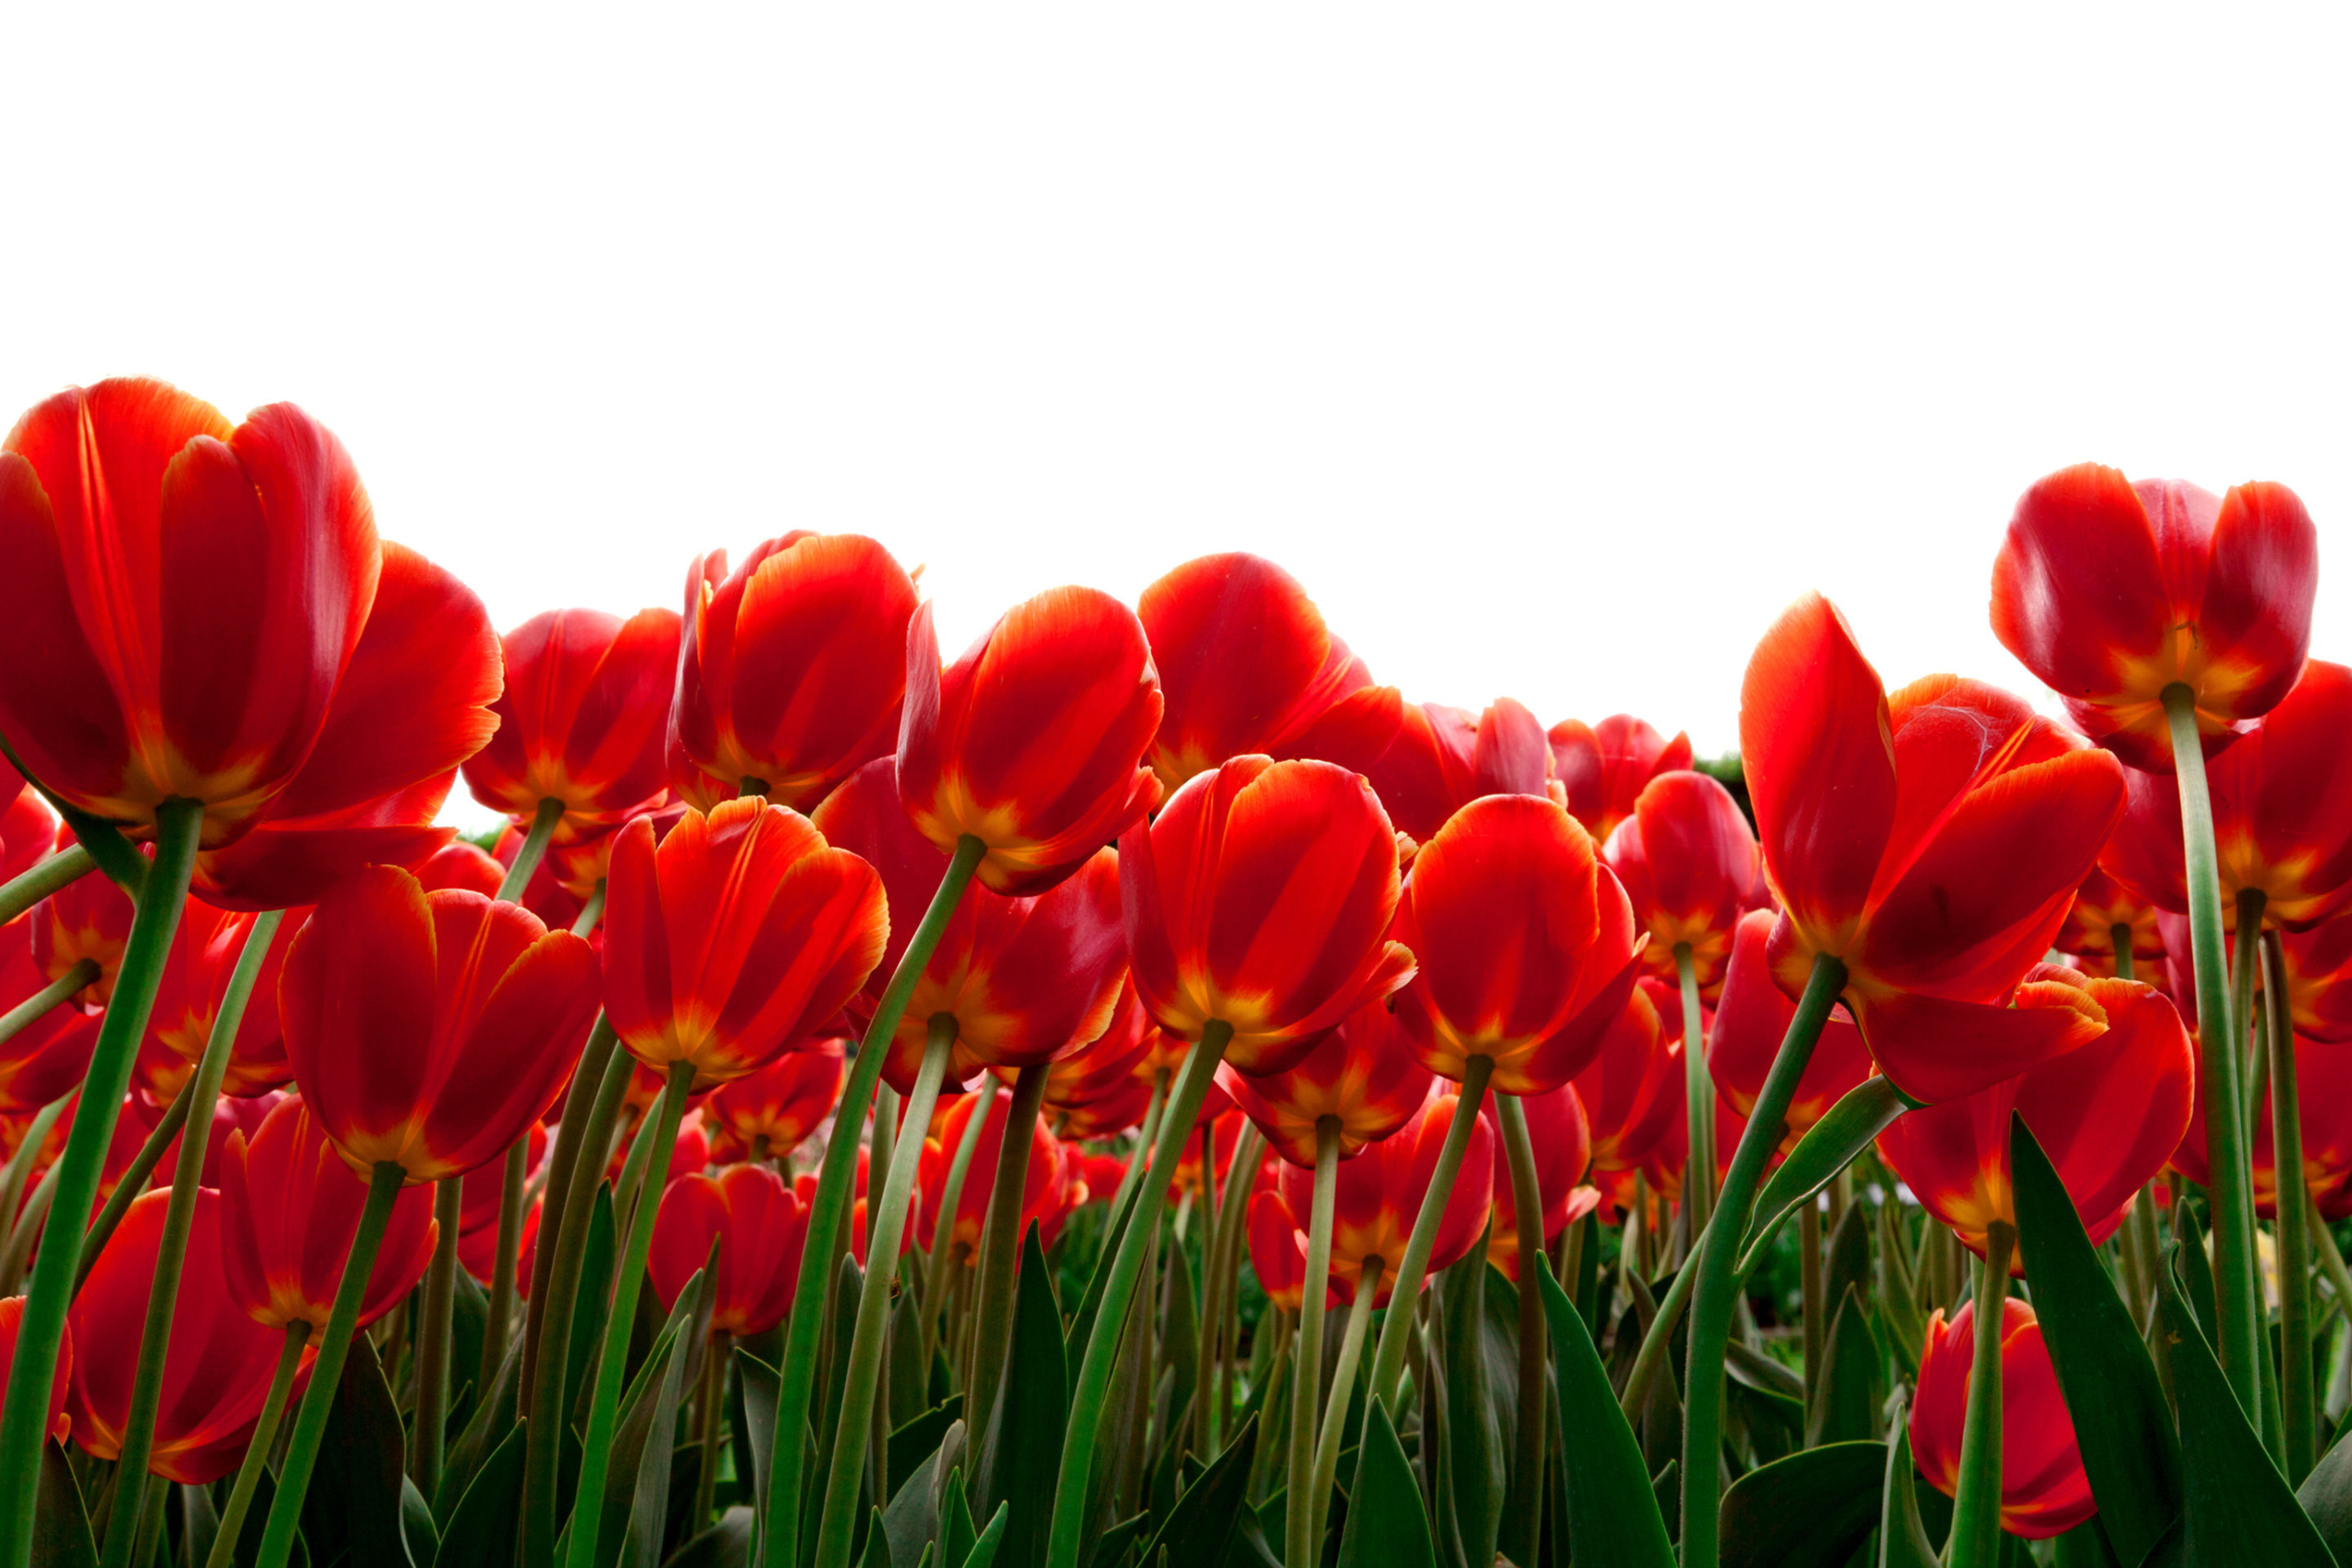 Red Tulips wallpaper 2880x1920